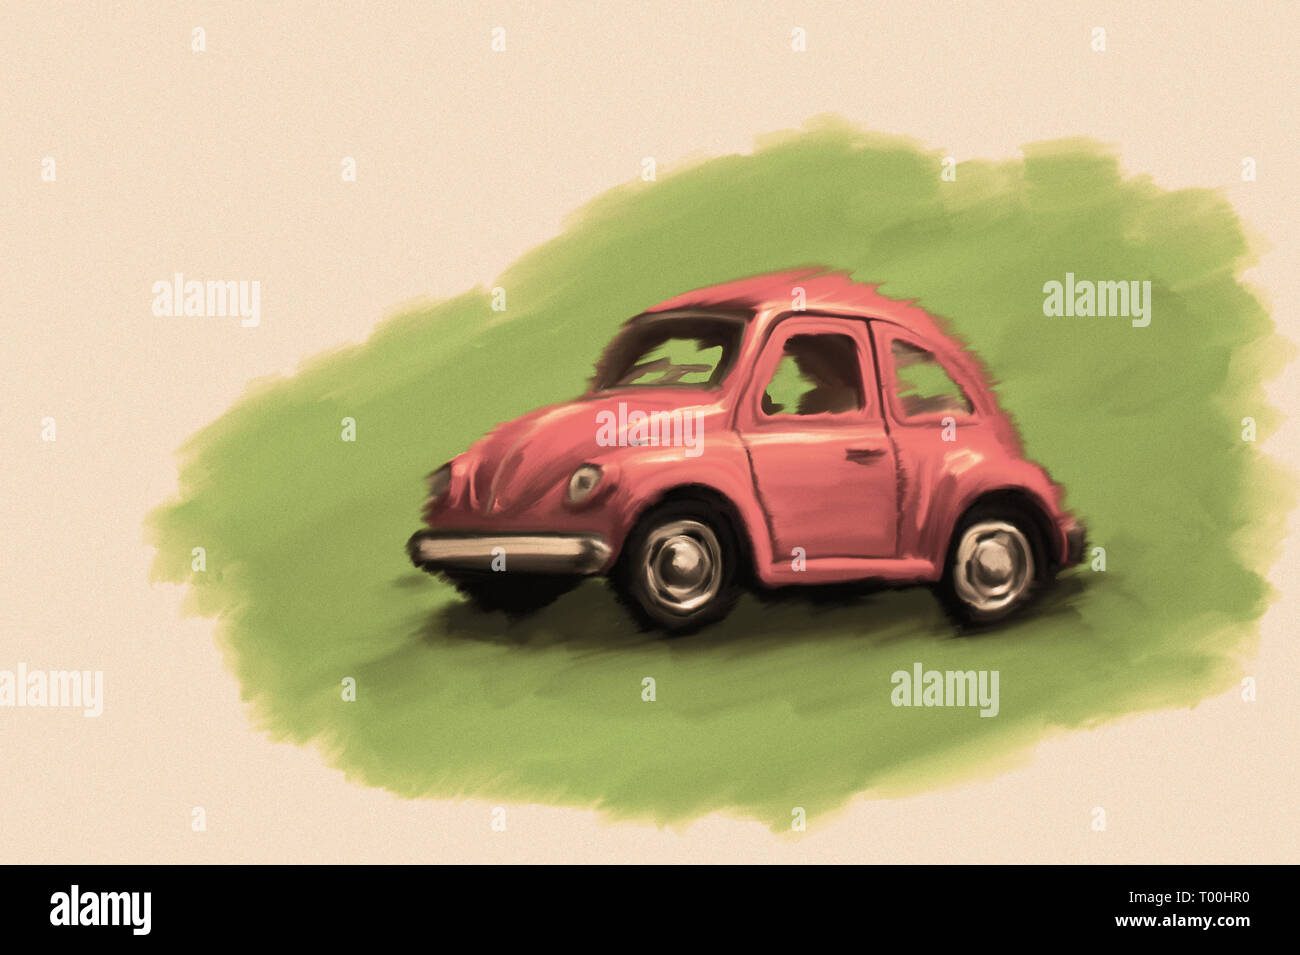 Red toy car illustration like oil paint on a white background. Stock Photo